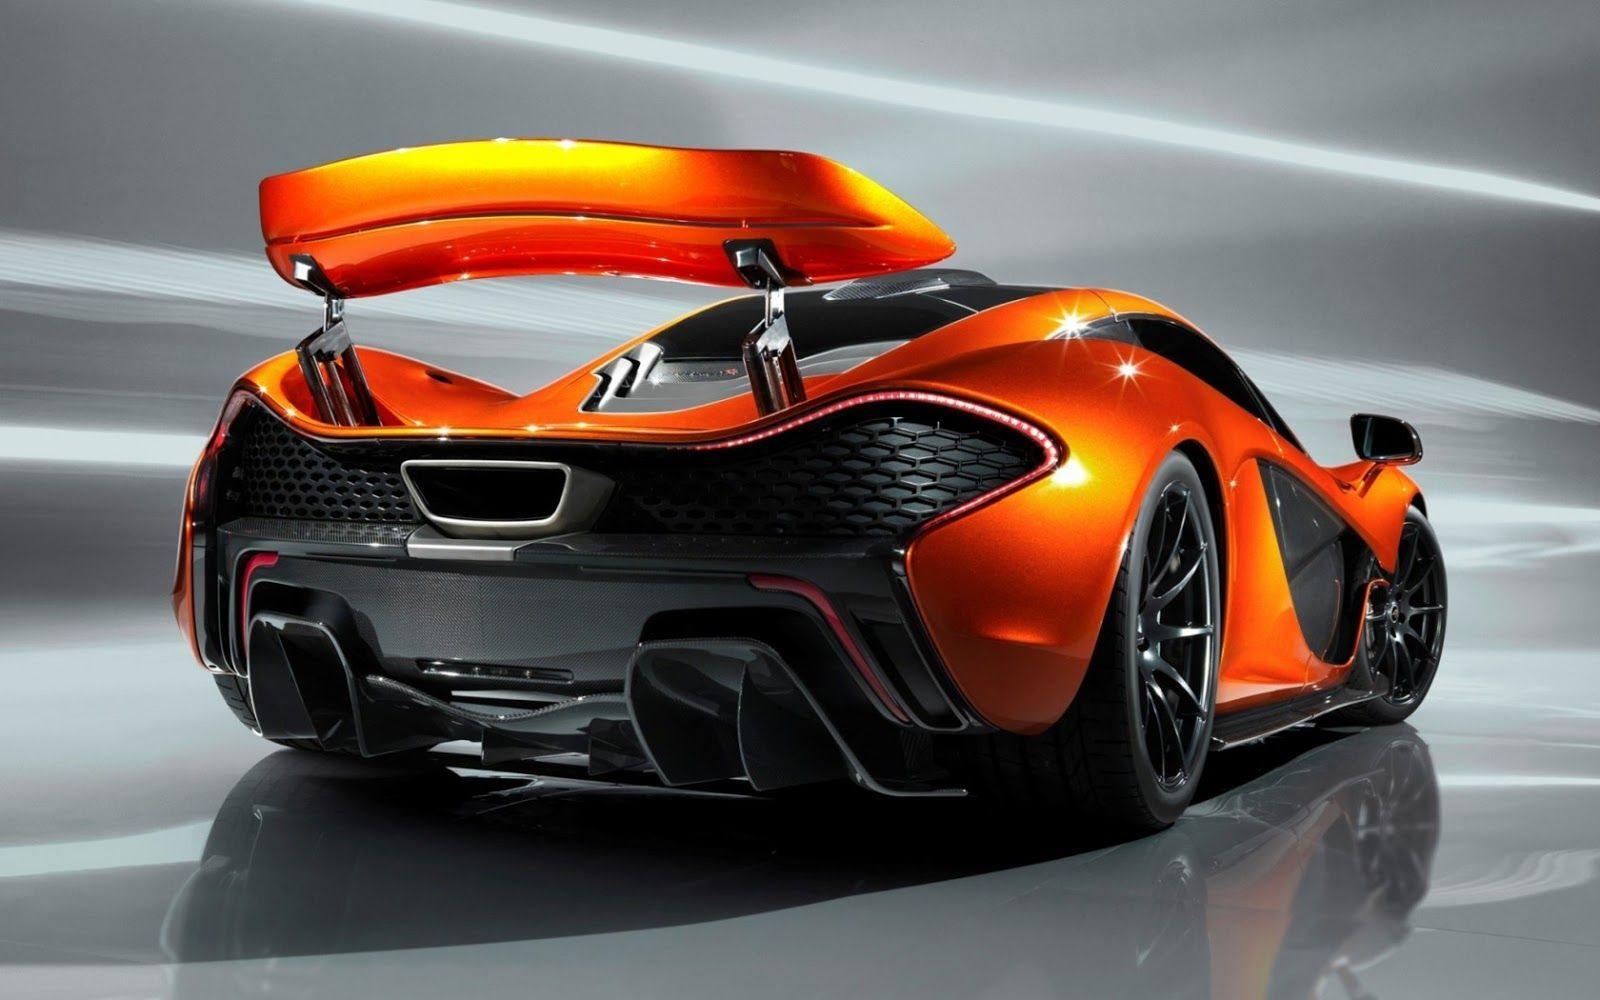 Whats The Fastest Car In The World 16021 Cars HD Wallpaper